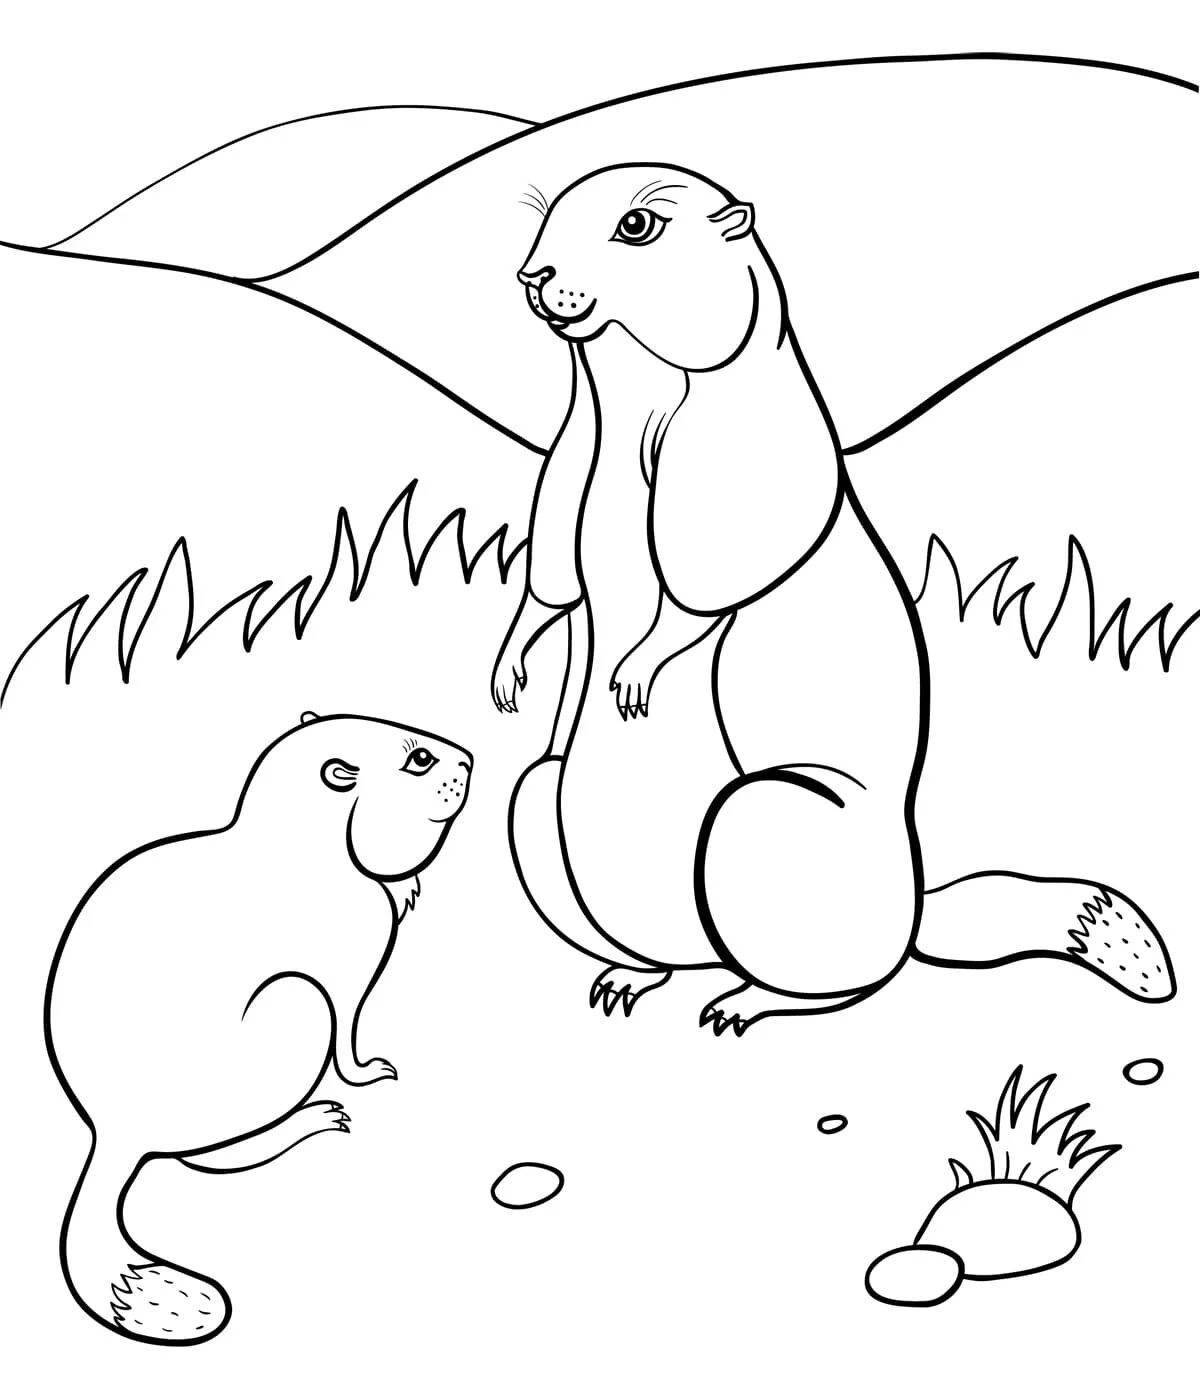 Adorable Groundhog Day Coloring Page